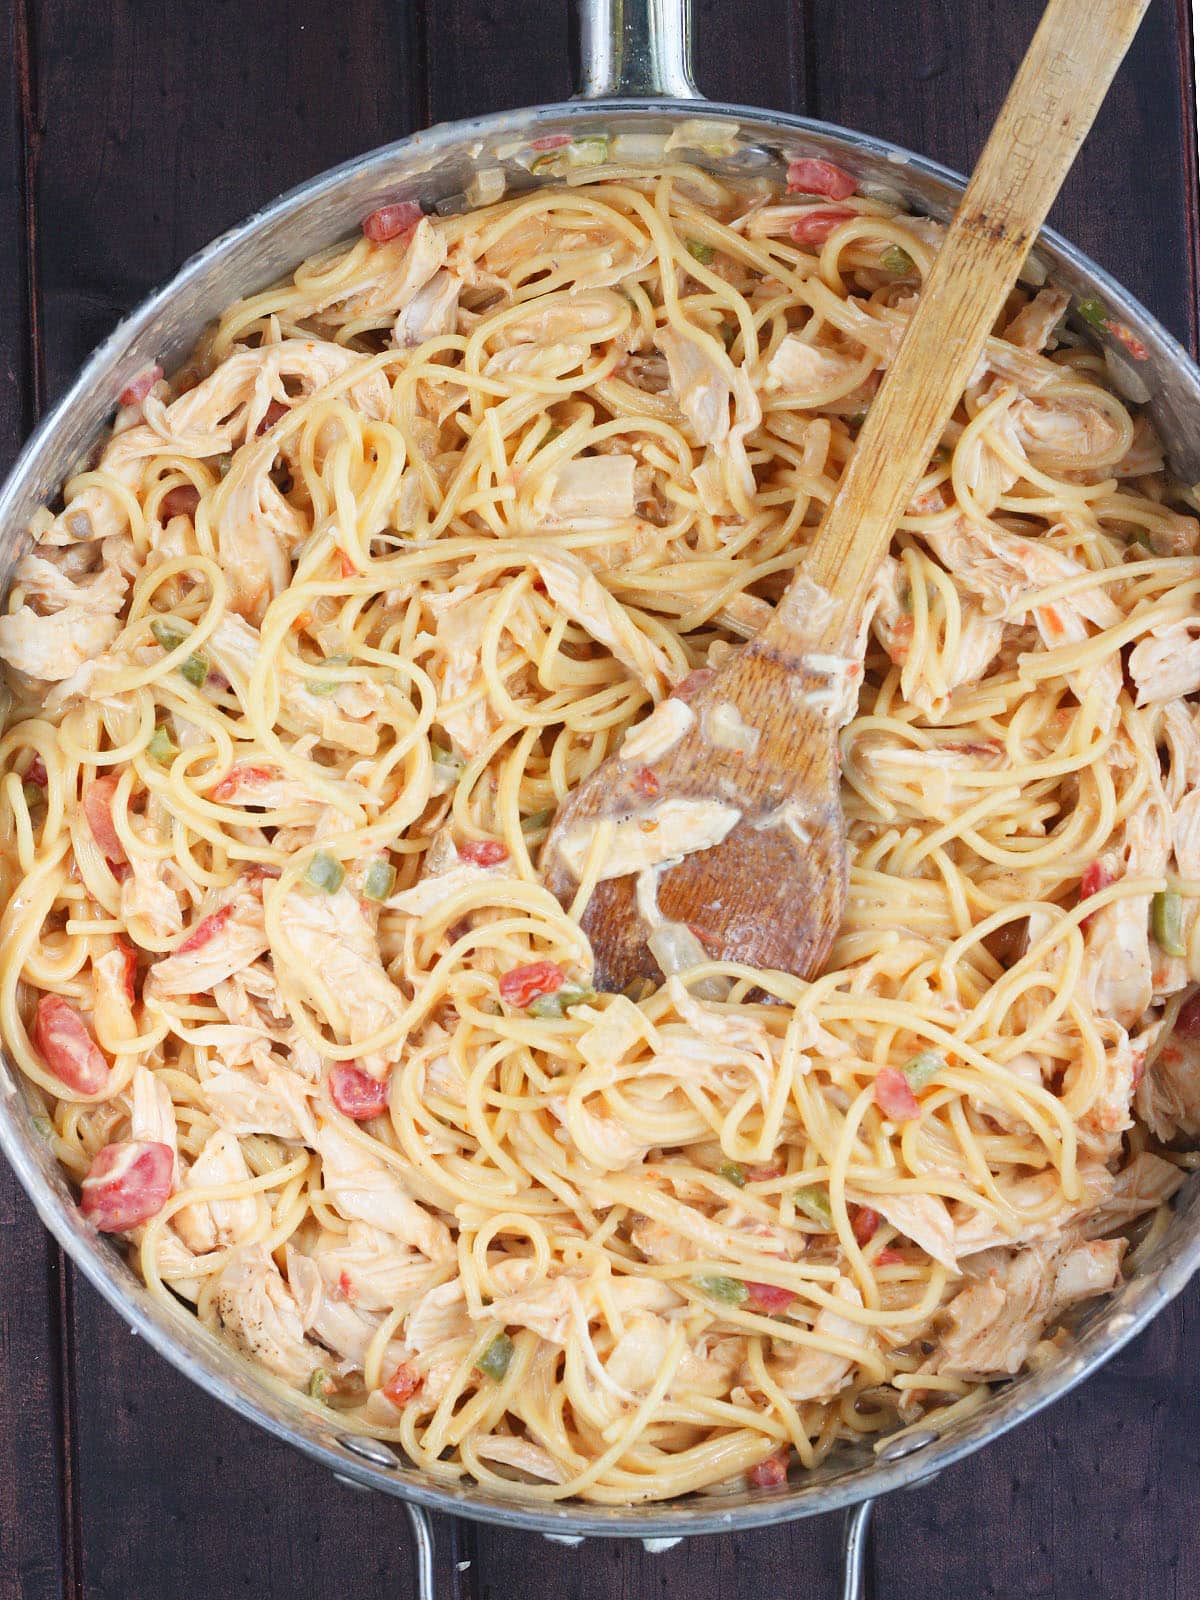 spaghetti noodles mixed with cheese, vegetables and rotel tomatoes in a large skillet